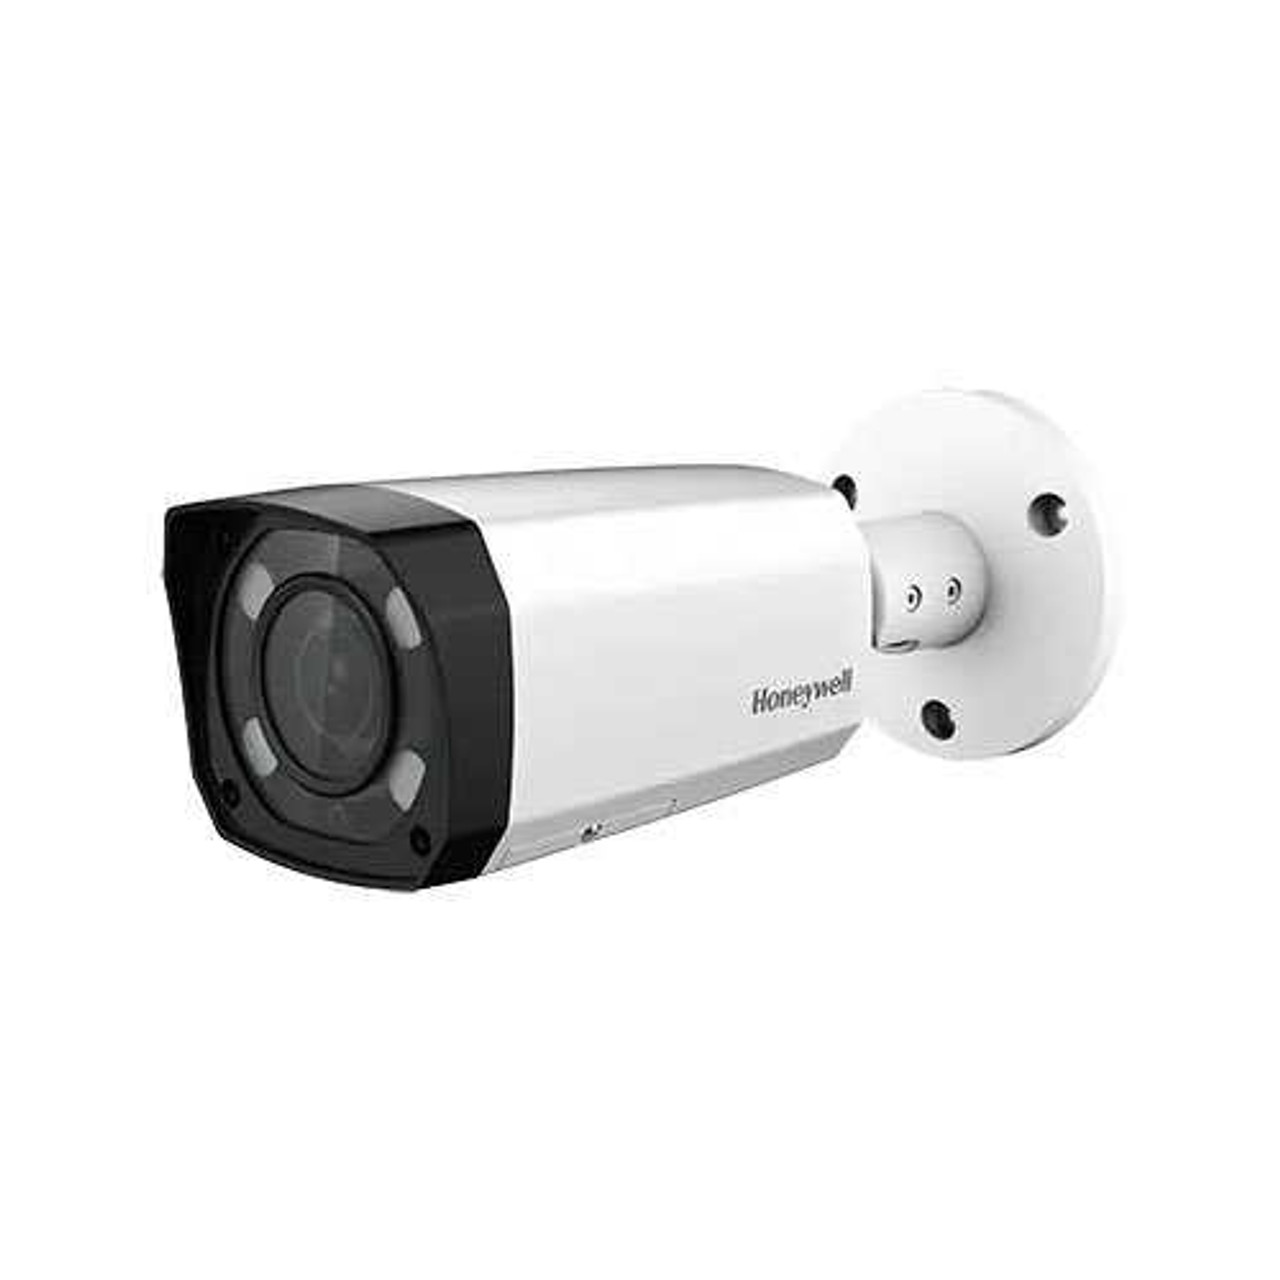 H0NEYWELL HBW2PER2V 2MP IR WDR Network Outdoor Bullet Camera with 3.7-13.5  mm MFZ Lens, RJ45 Connecton